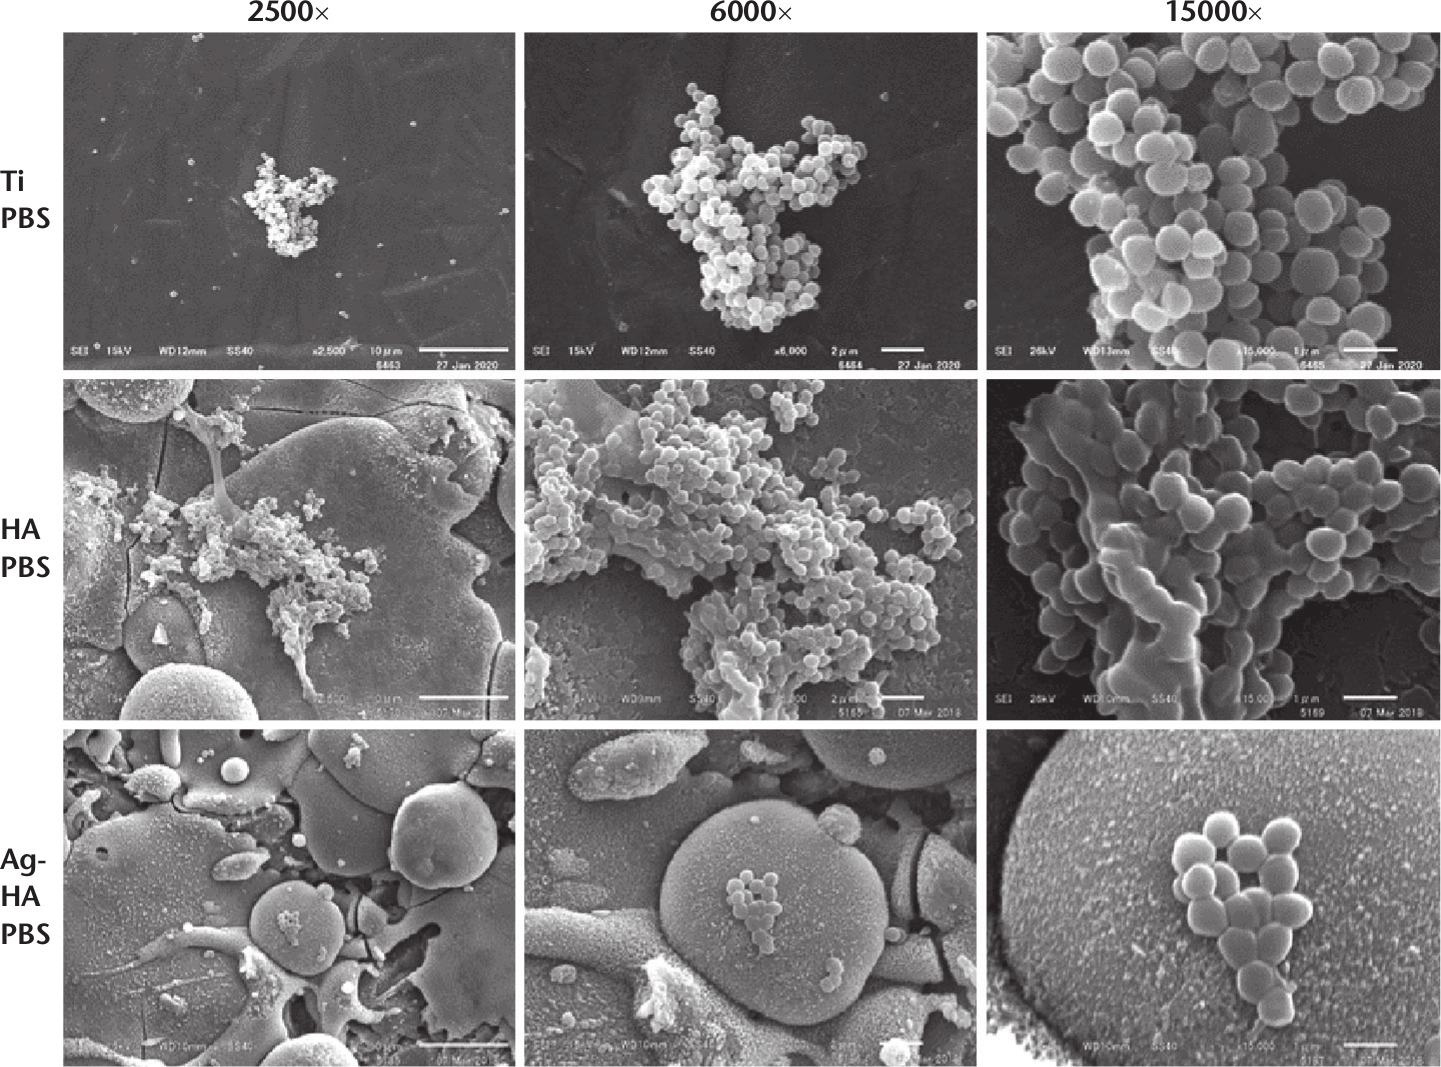 Fig. 3 
            Scanning electron microscopy (SEM) images of the methicillin-resistant Staphylococcus aureus (MRSA) biofilms in the titanium phosphate-buffered saline (Ti PBS), hydroxyapatite PBS (HA PBS), and silver-containing HA PBS (Ag-HA PBS) groups. The magnifications and corresponding scale bars were 2500× and 10 µm, 6000× and 2 µm, and 15000× and 1 µm, respectively. The biofilms in the Ti PBS group were embedded in less extracellular polymeric substance (EPS) and were large, whereas those in the HA PBS group were embedded in large quantities of EPS and were large. In the Ag-HA PBS group, the biofilms were embedded in less EPS and were small and scattered.
          